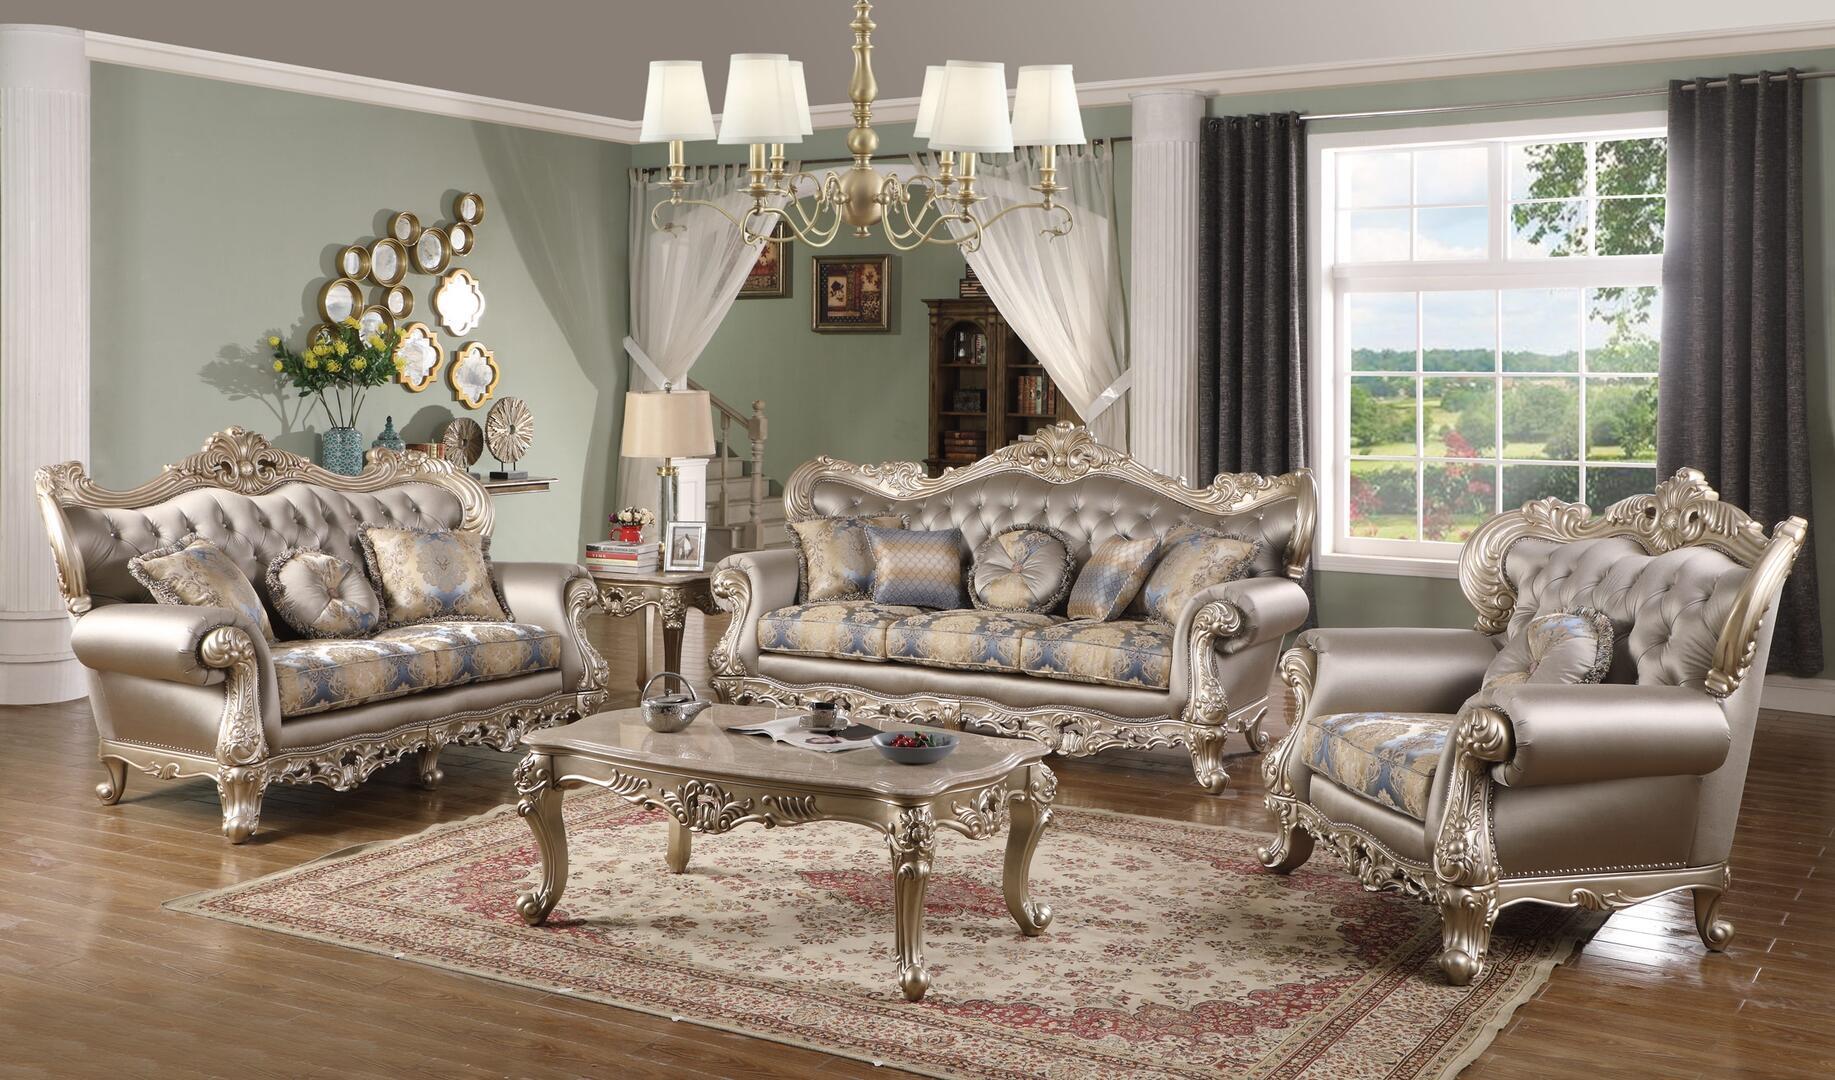 Transitional Sofa Loveseat Chair and Coffee Table Ariel Ariel-Set-4 in Silver Faux Leather